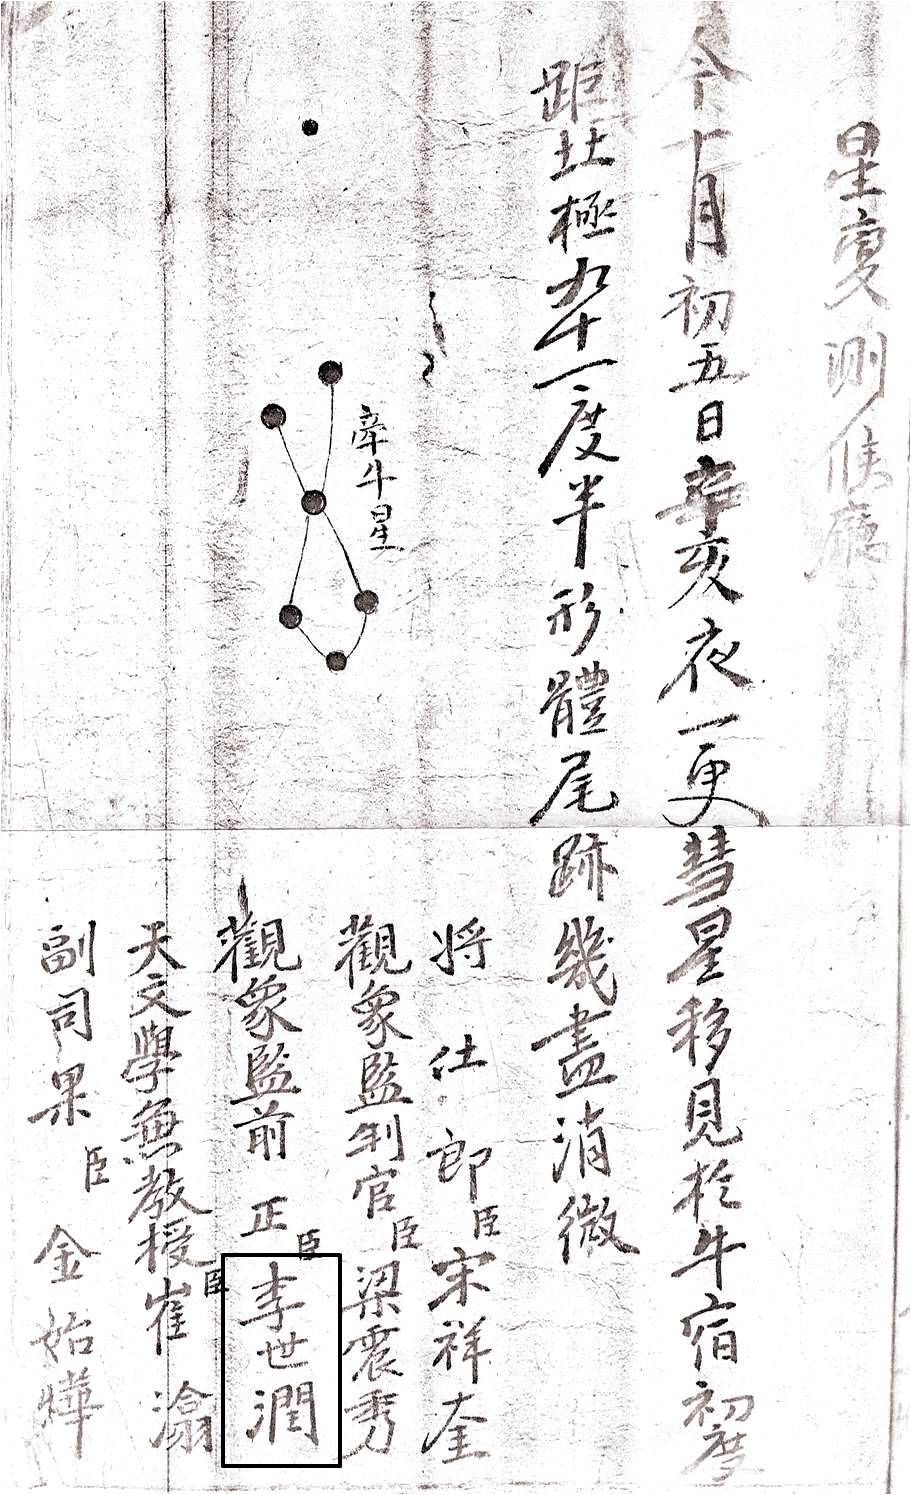 A comet record on the fifth day of the tenth month of the 1723 SeongbyeonDeungrok. Yi Se-yoon (李世潤)’s name is seen on the third position from right (Courtesy of Yonsei University Library).